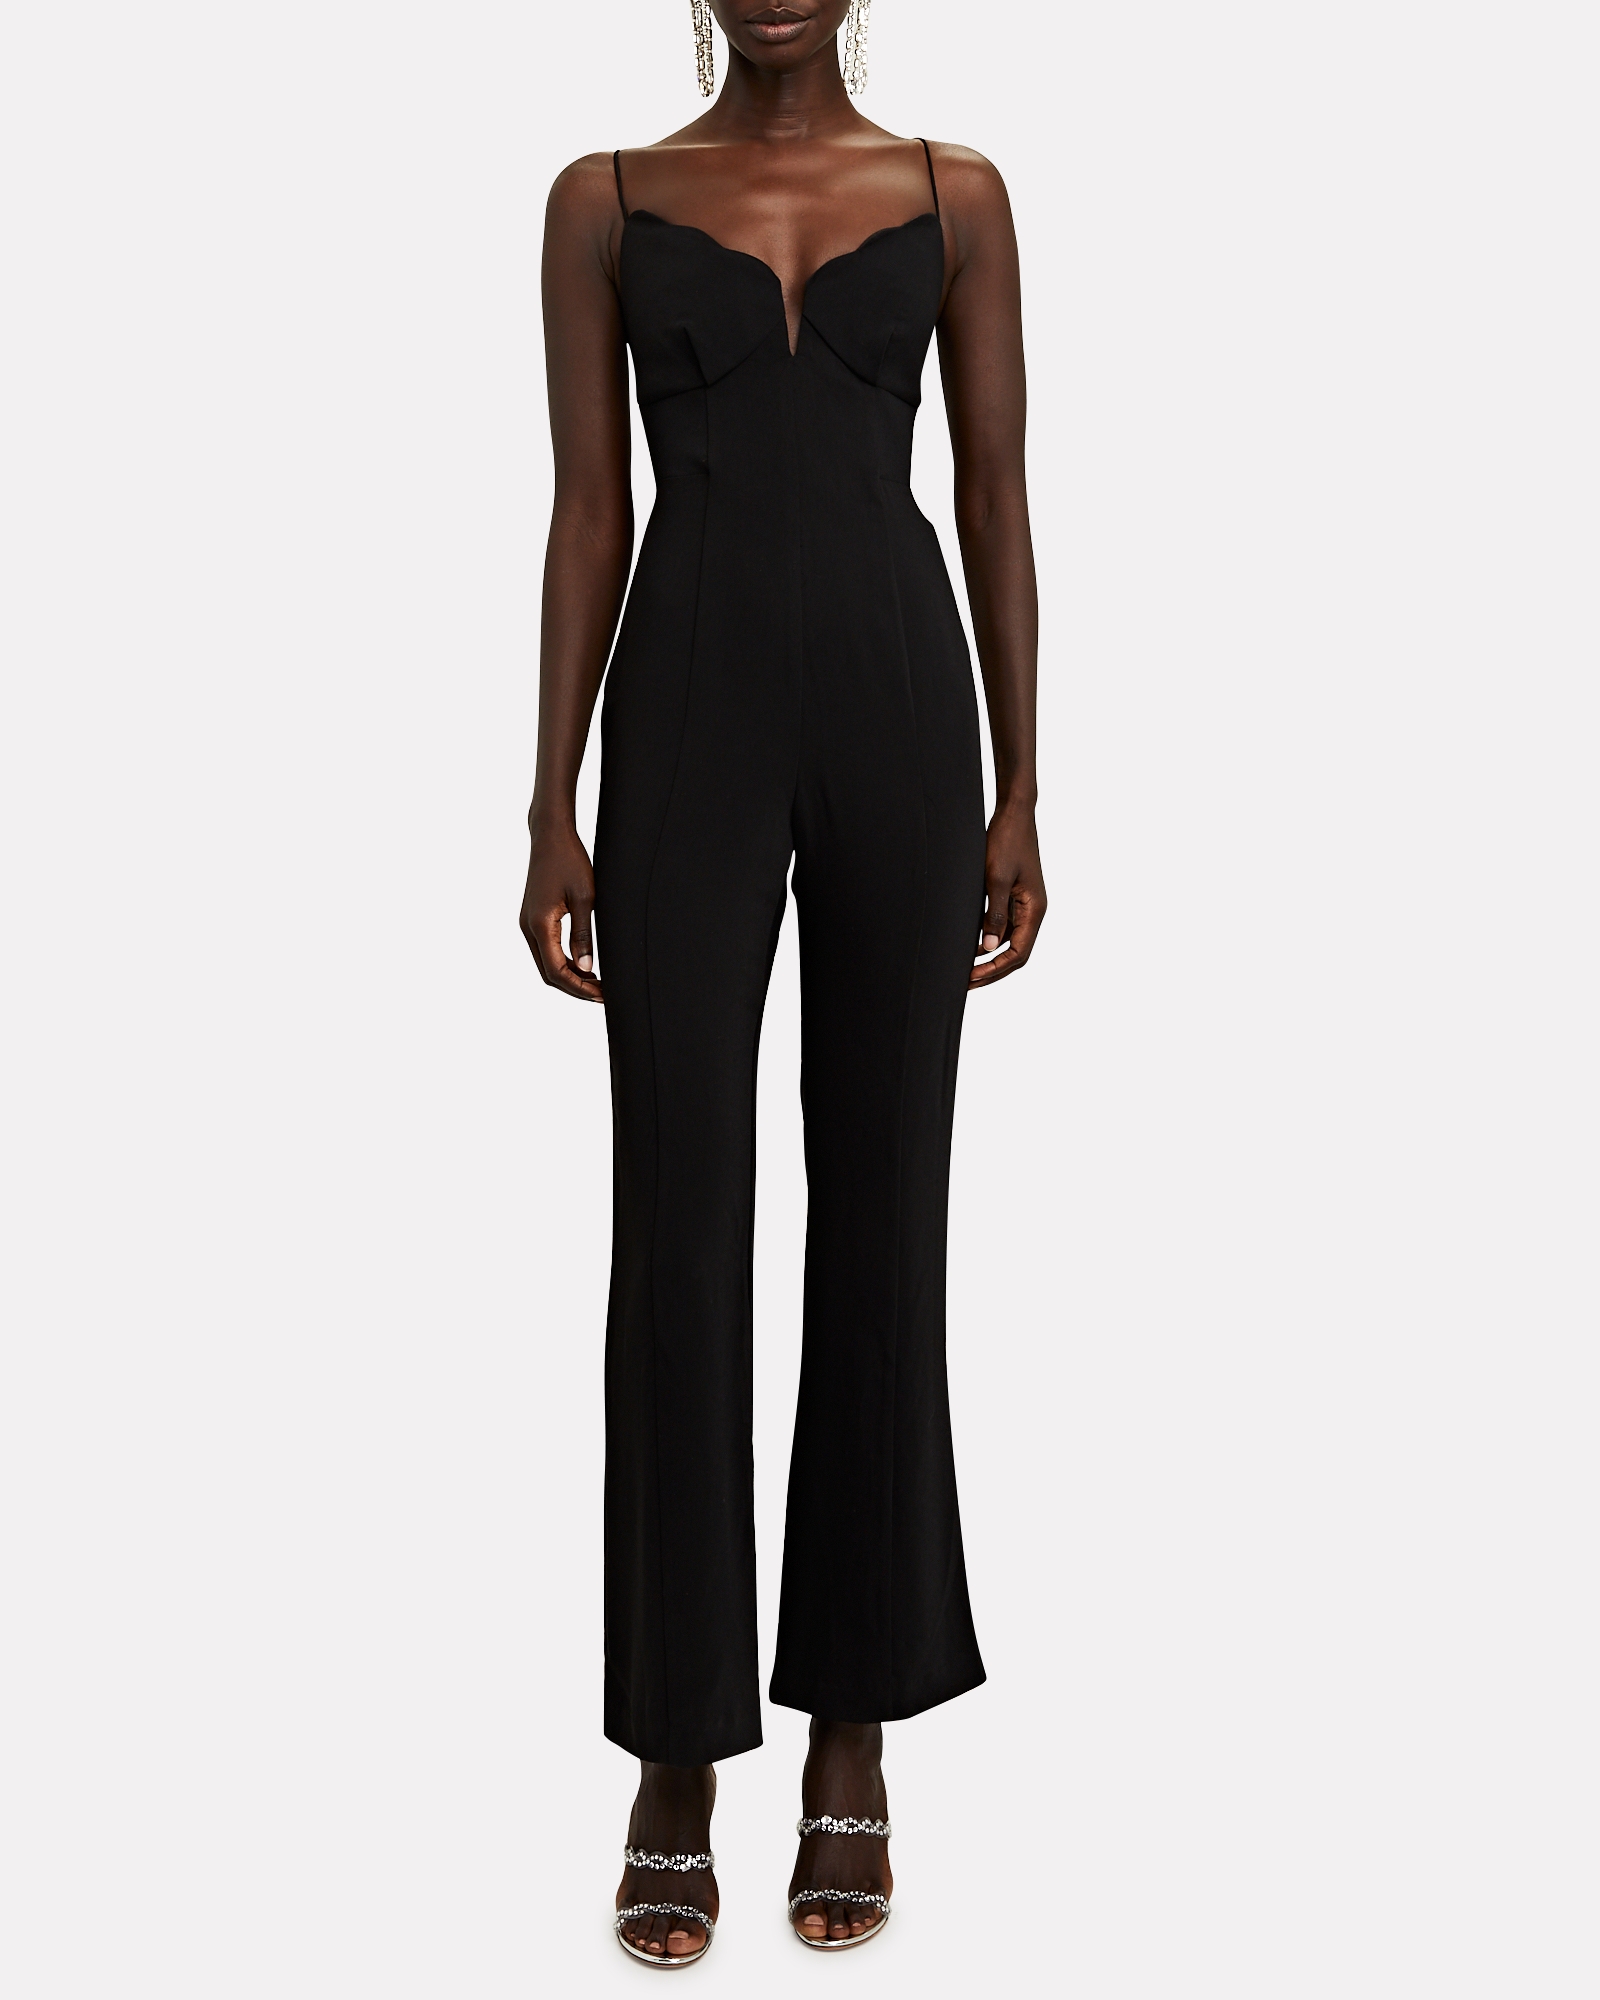 Significant Other Jeannie Scalloped Crepe Jumpsuit | INTERMIX®